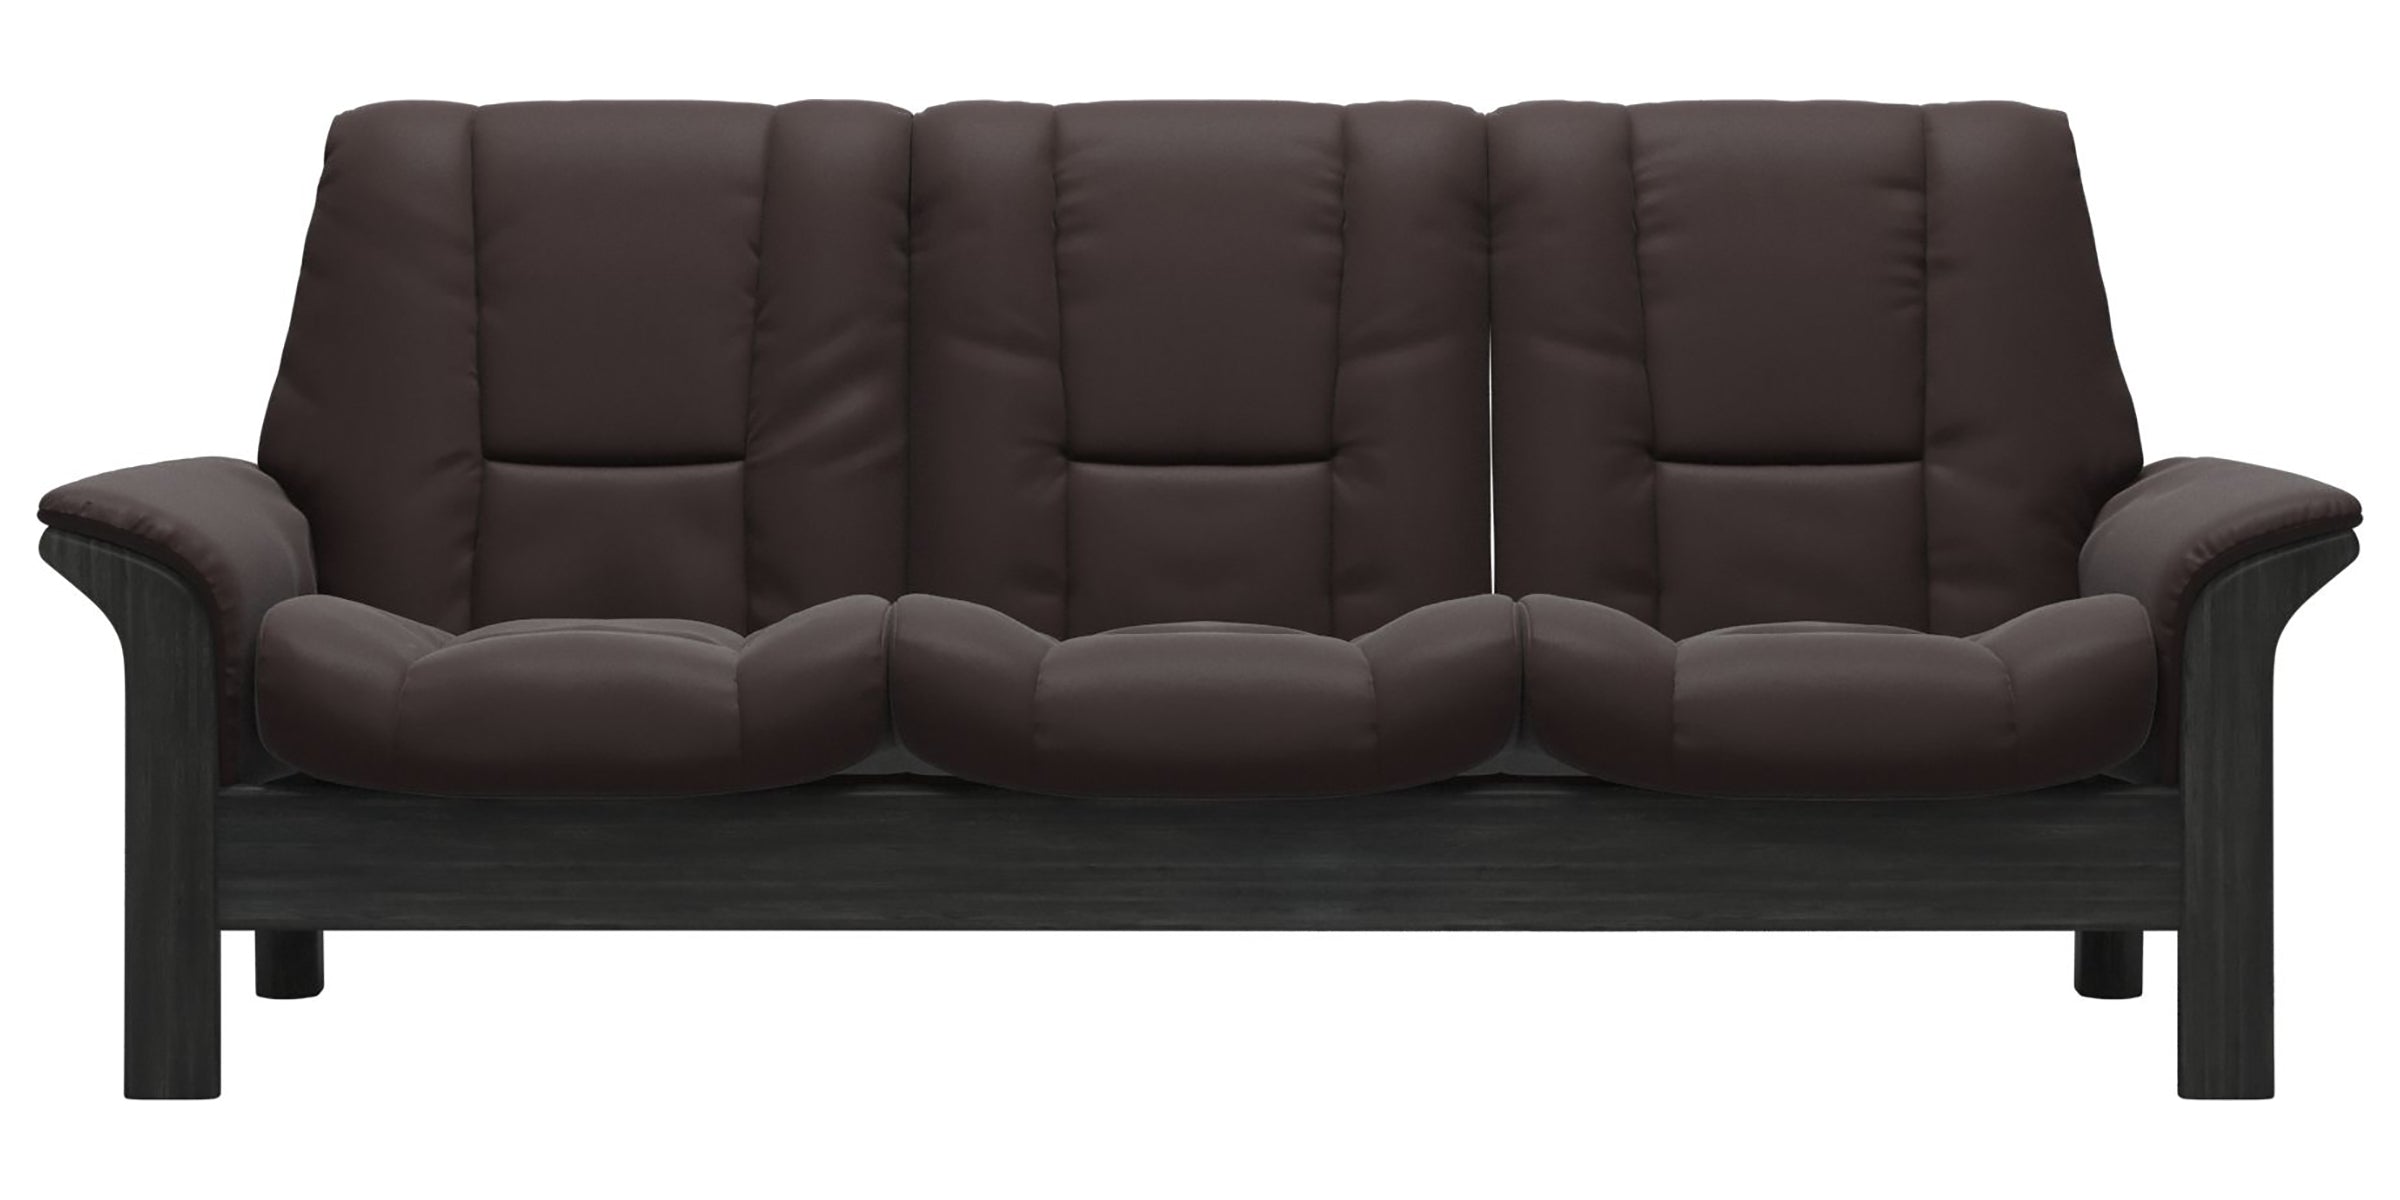 Paloma Leather Chocolate and Grey Base | Stressless Windsor 3-Seater Low Back Sofa | Valley Ridge Furniture